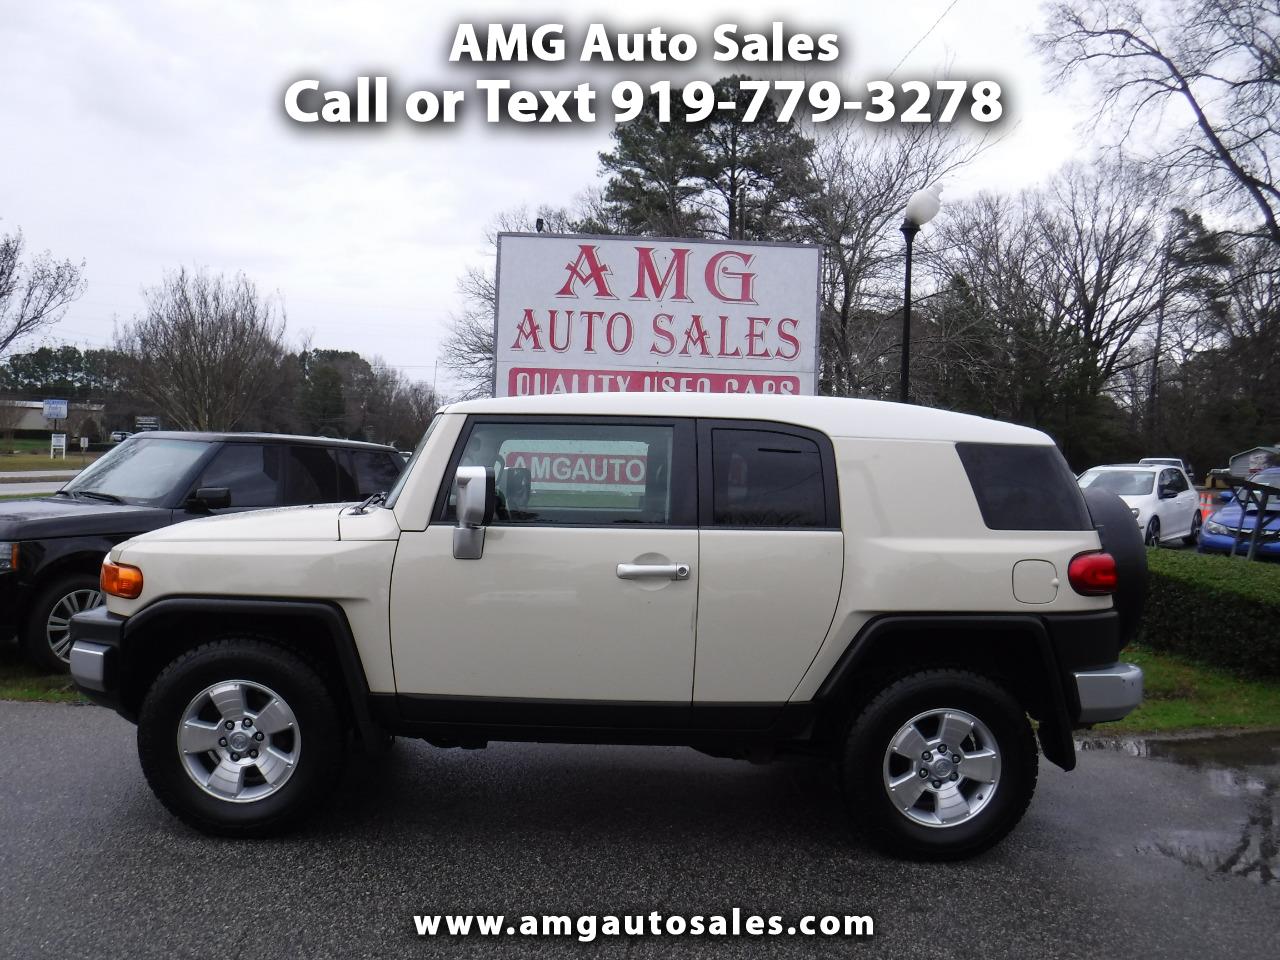 Used 2008 Toyota Fj Cruiser 4wd At For Sale In Raleigh Nc 27603